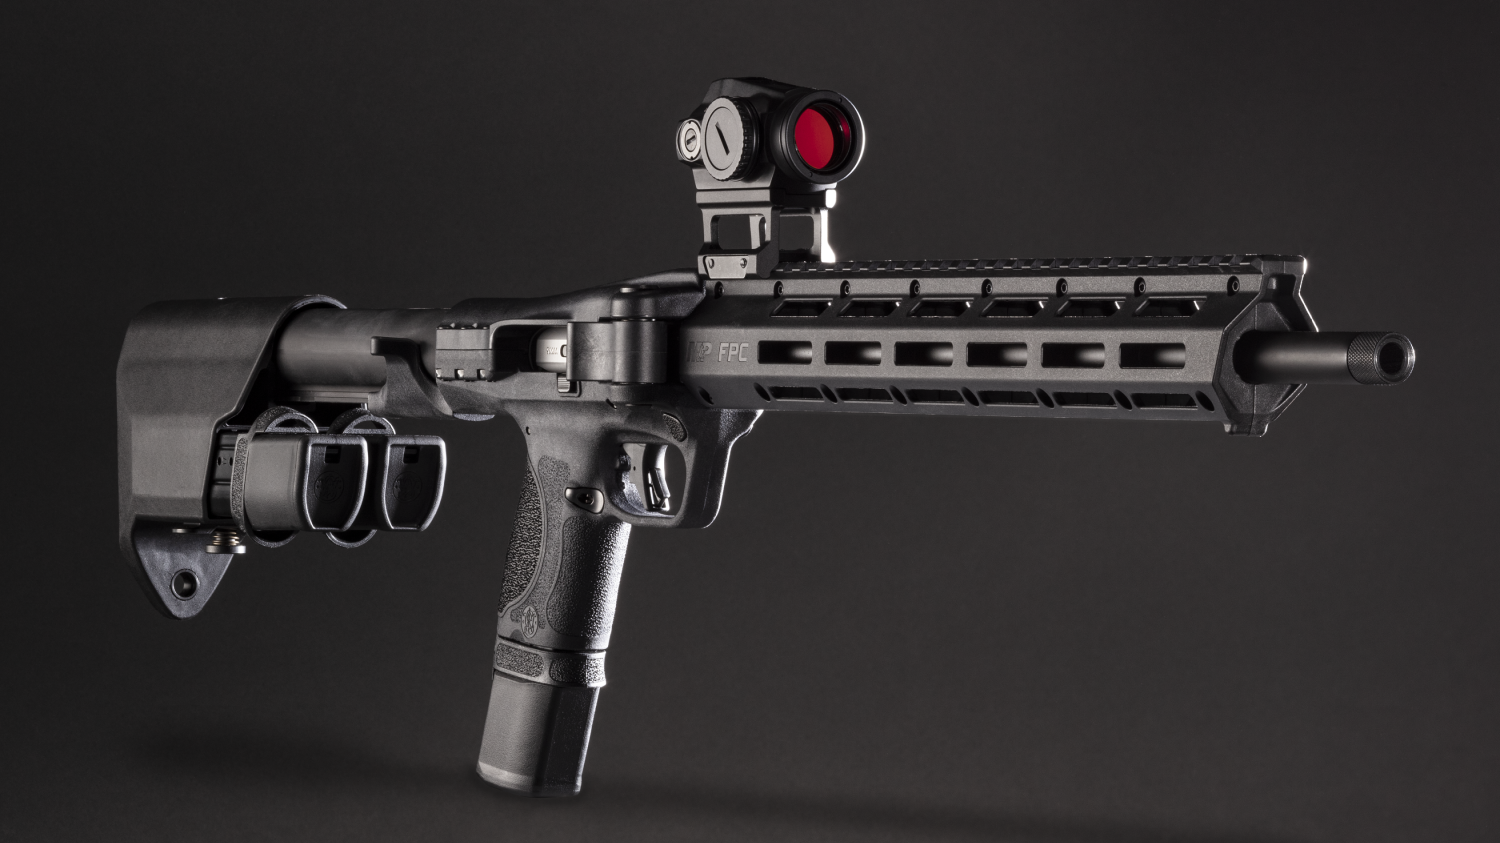 Meet the New Folding Pistol Carbine (M&P FPC) from Smith & Wesson